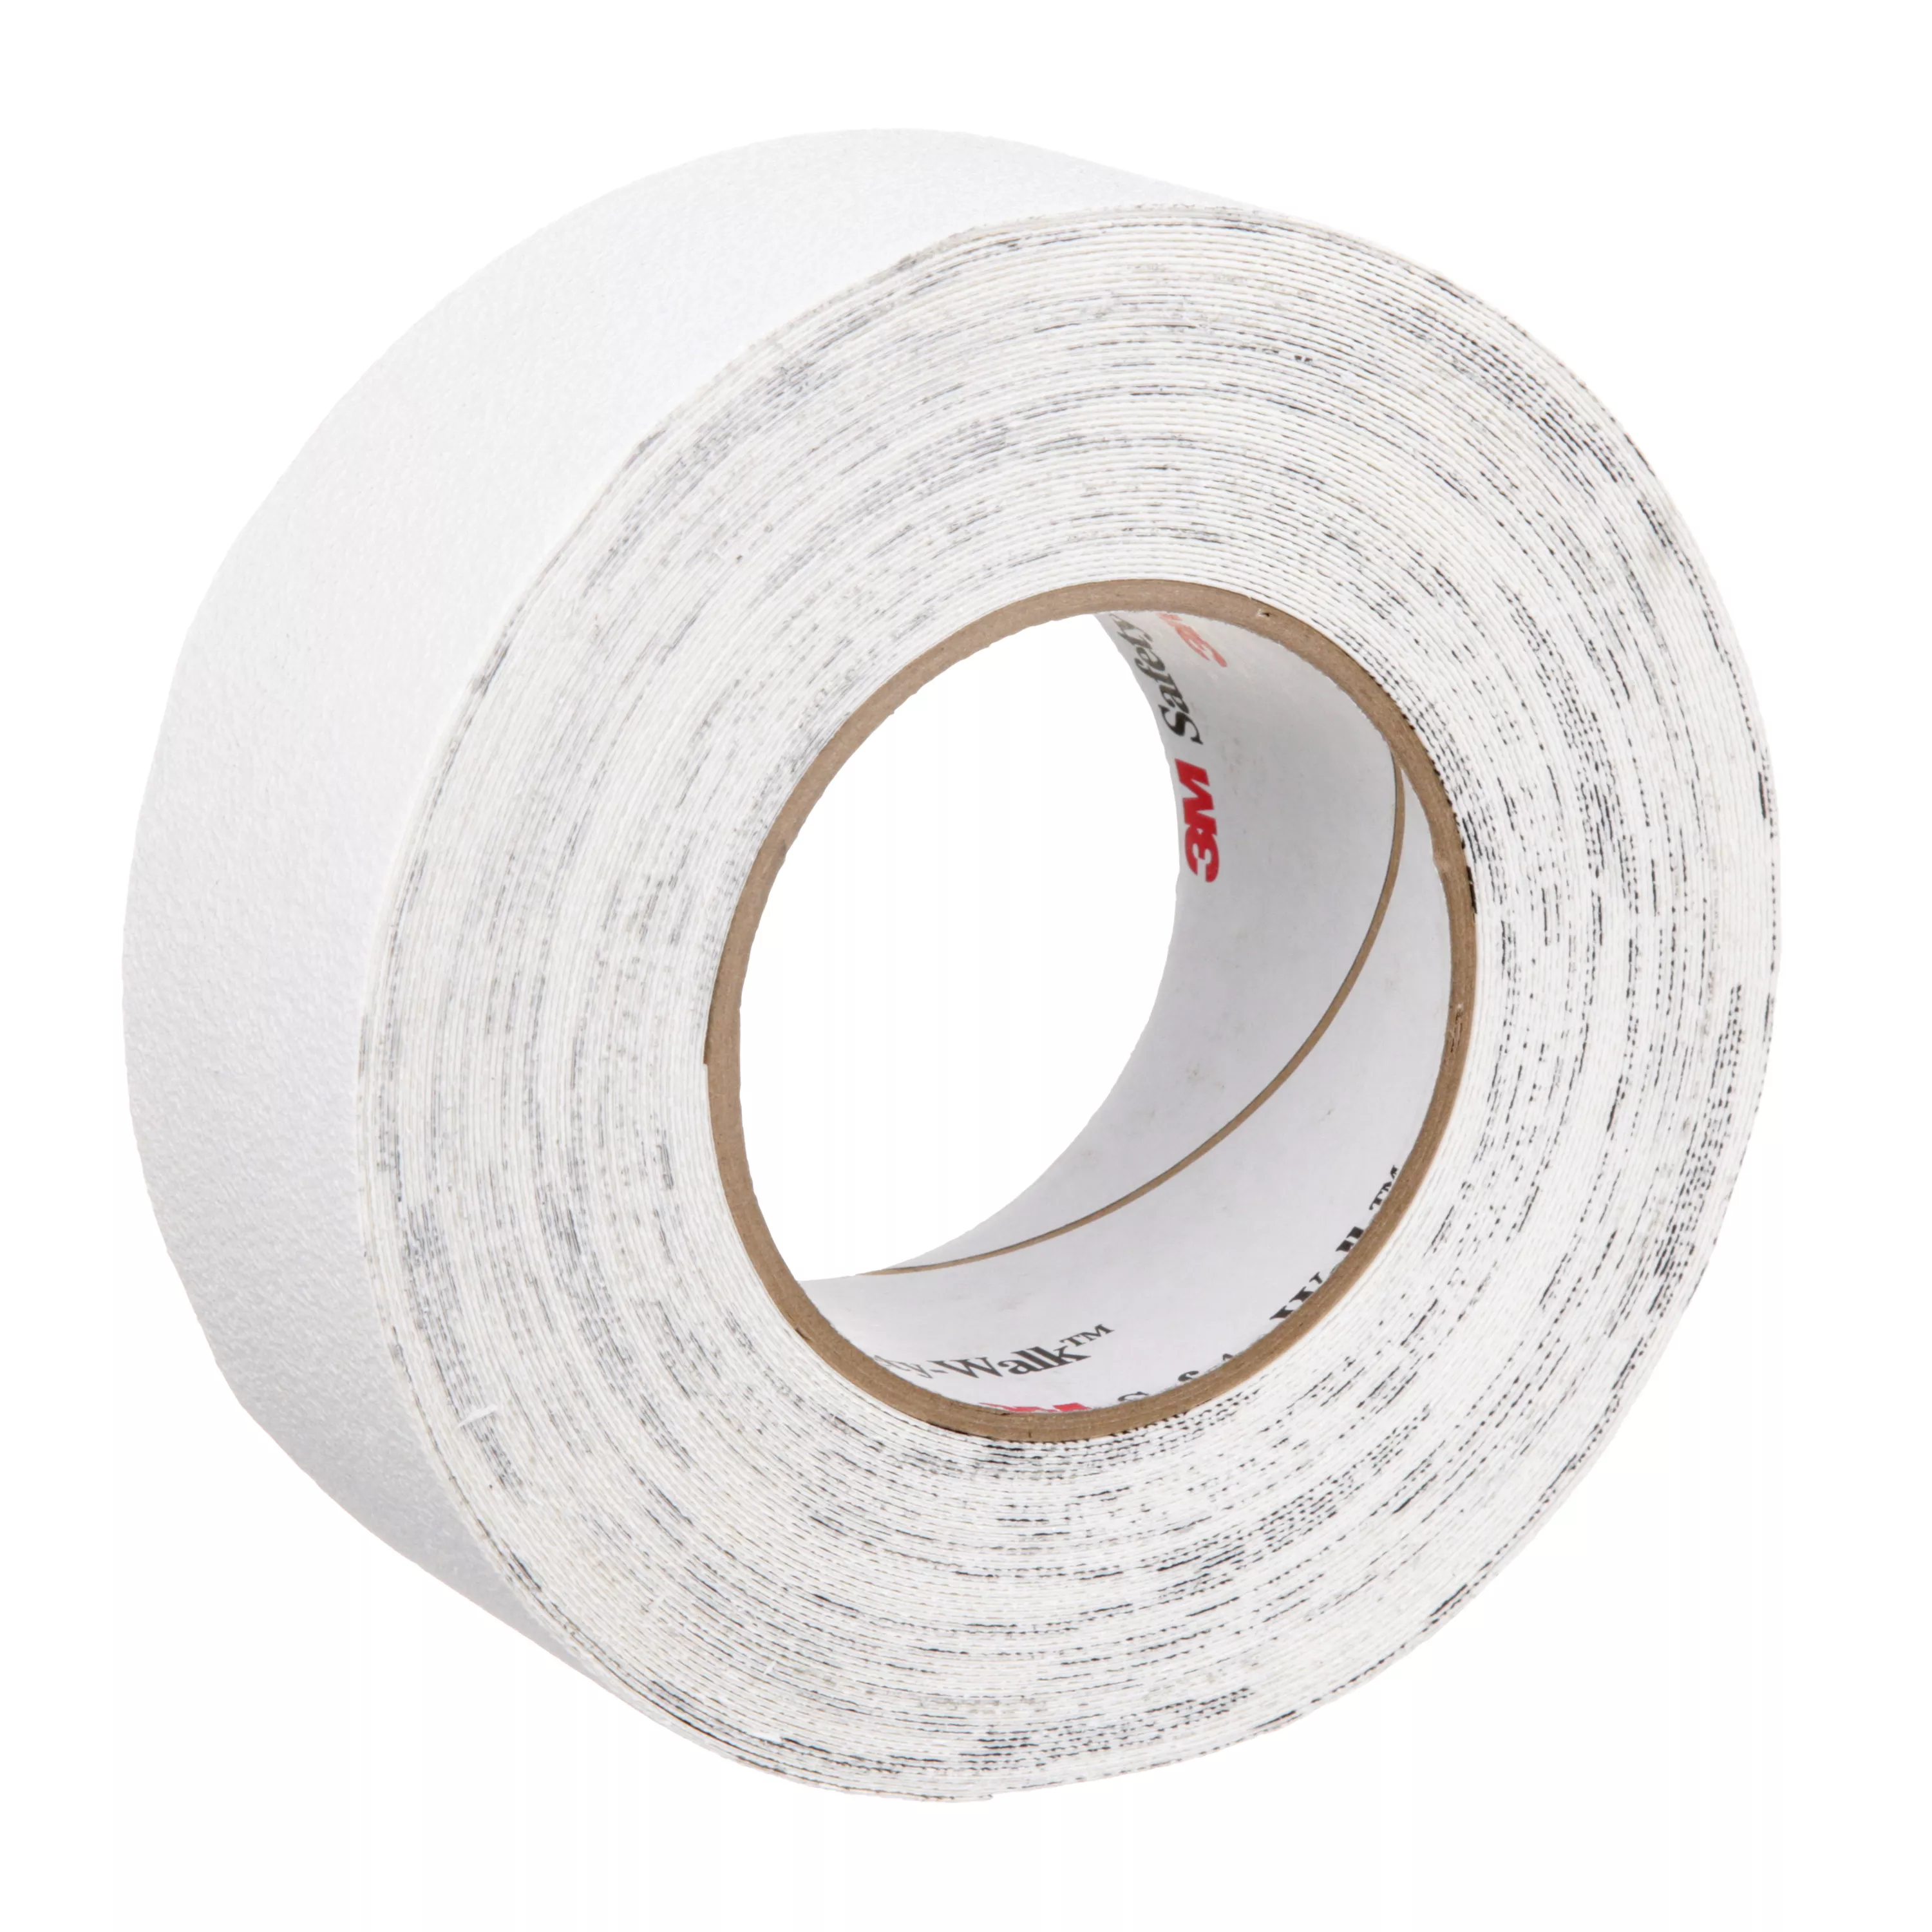 3M™ Safety-Walk™ Slip-Resistant Fine Resilient Tapes & Treads 280,
White, 2 in x 60 ft, 2 Rolls/Case